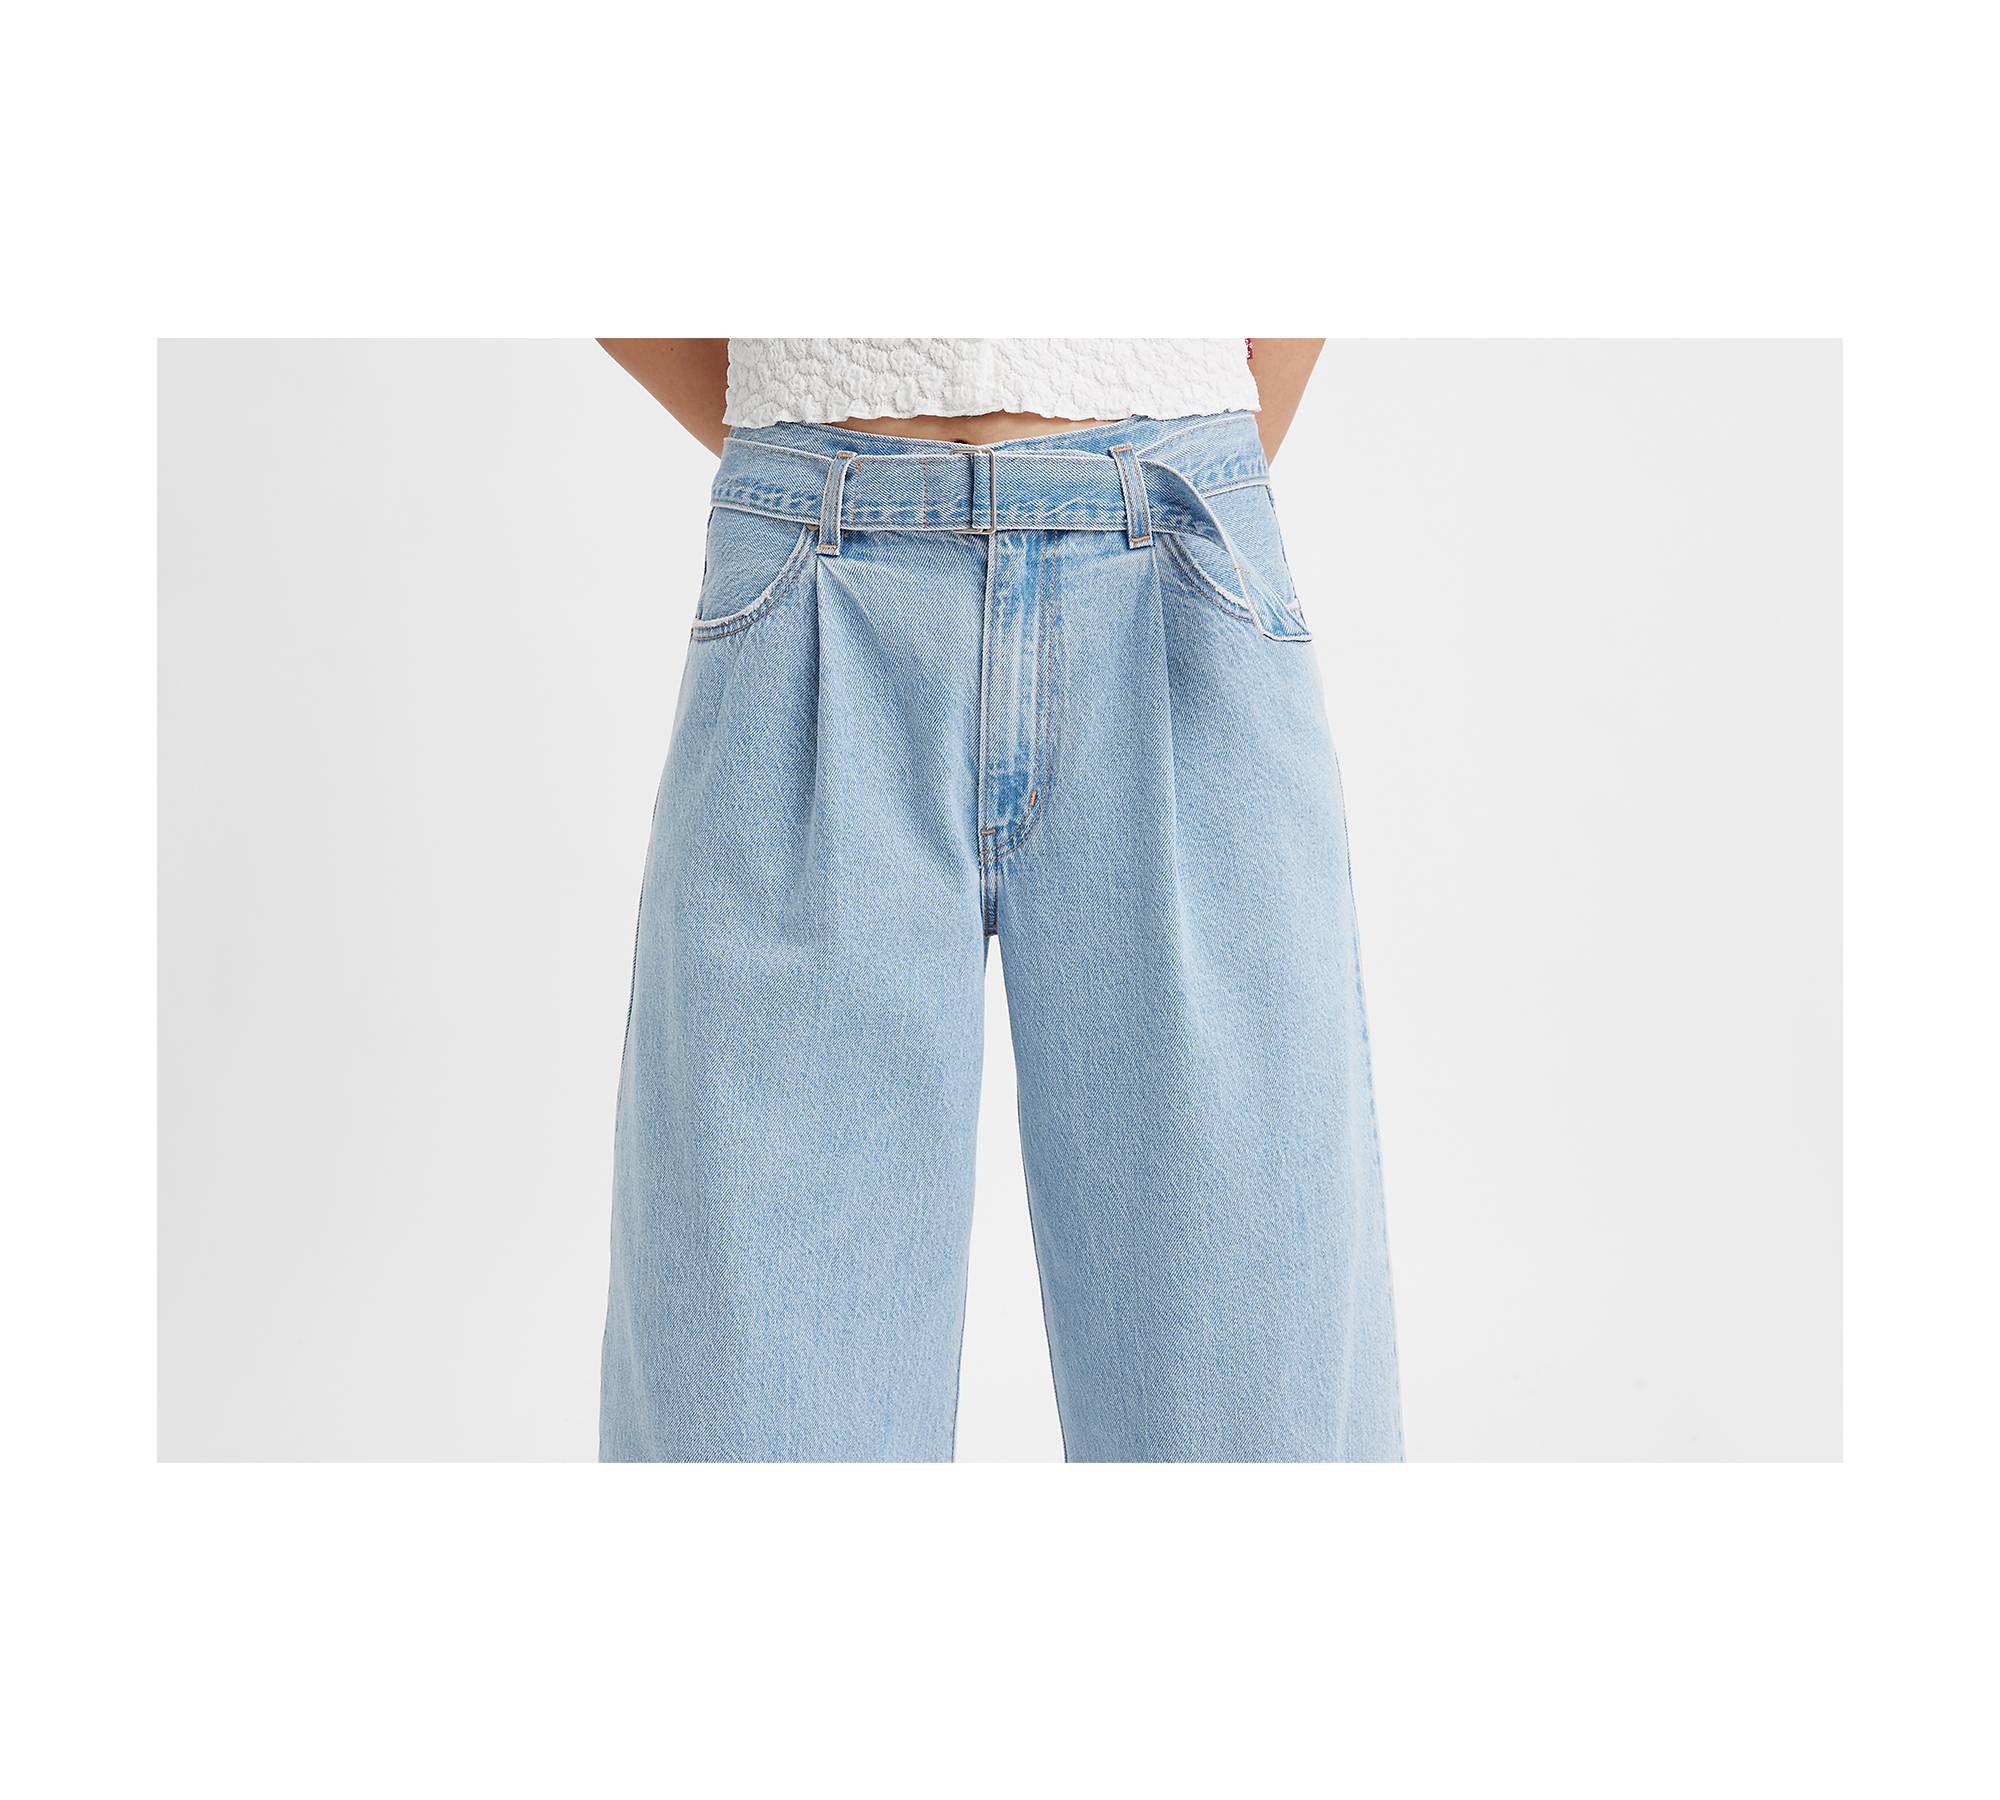 Belted Baggy Women's Jeans - Light Wash | Levi's® US